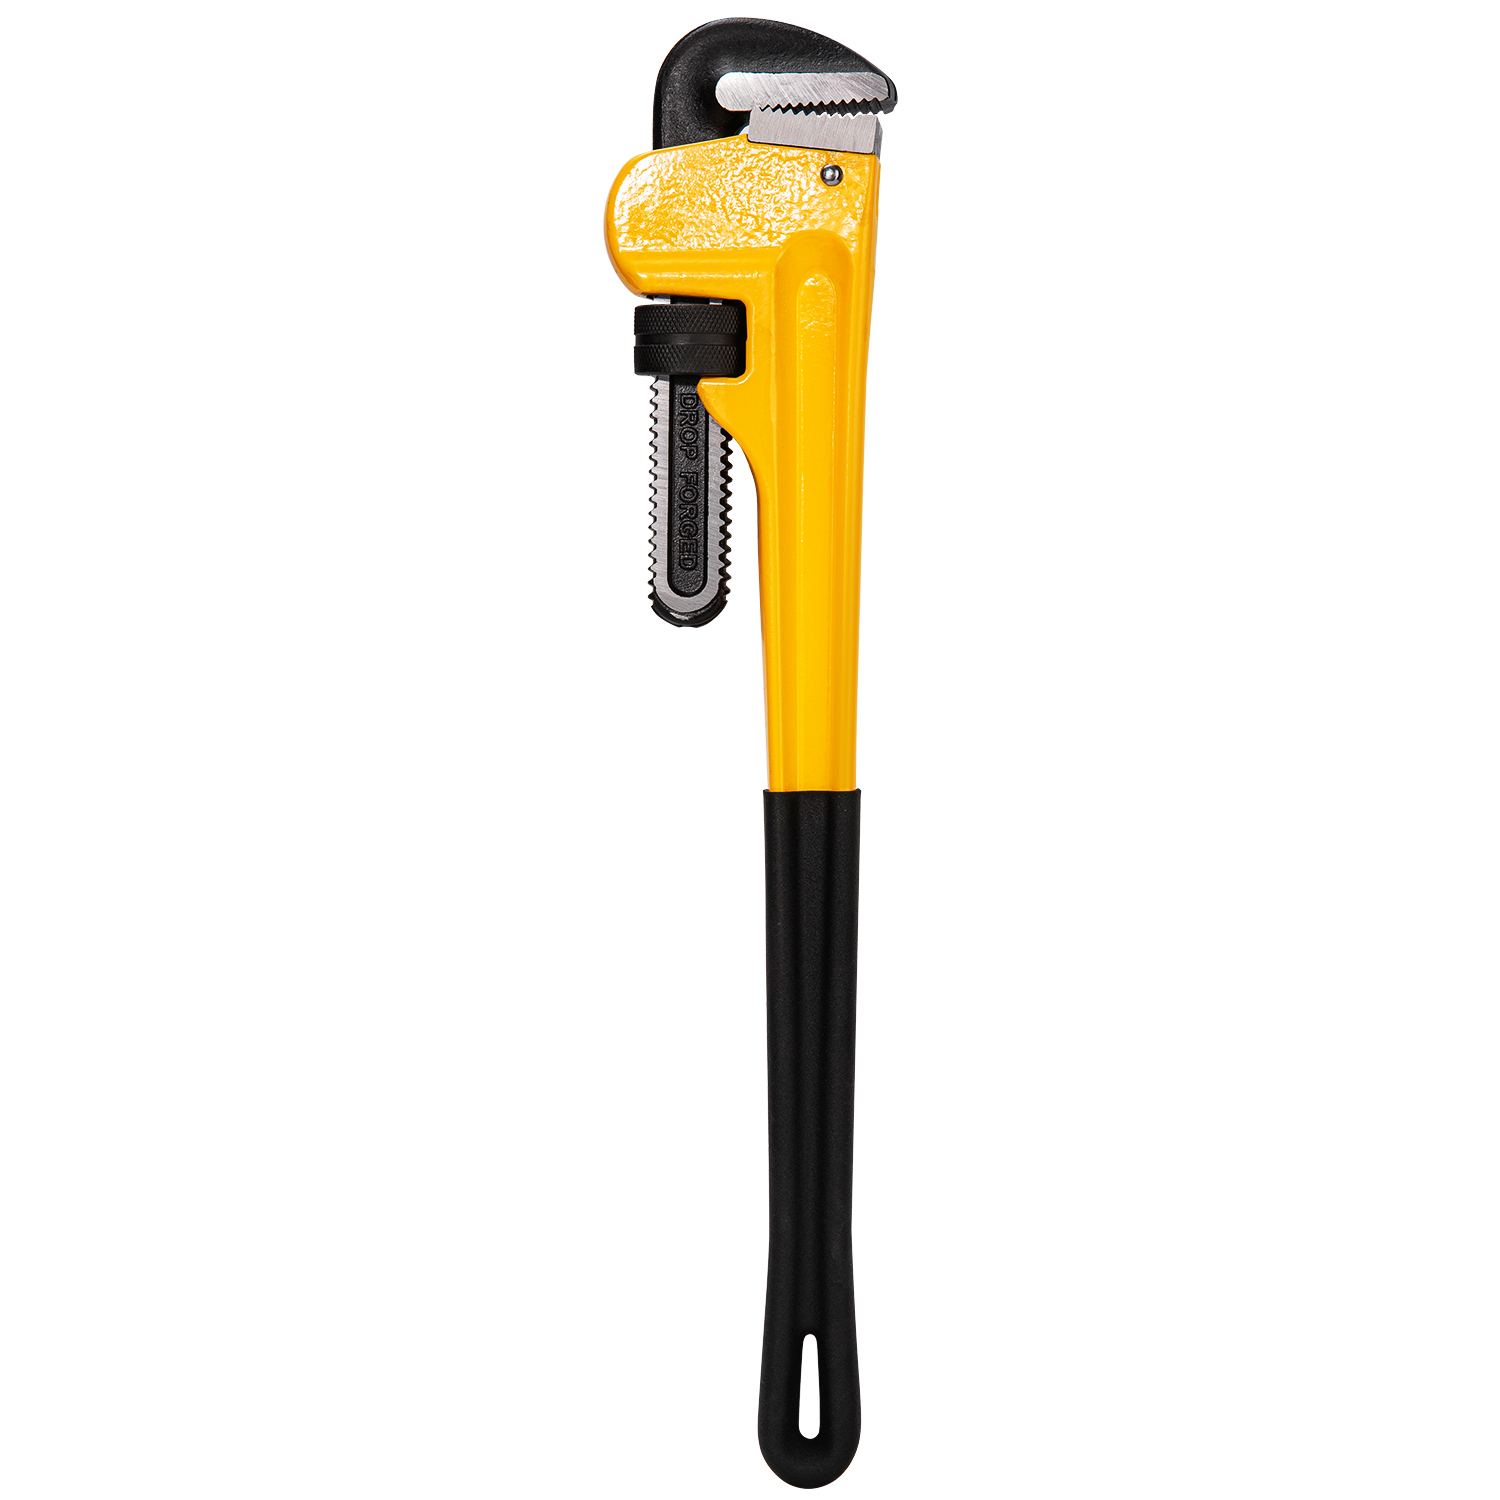 Adjustable Pipe Wrench with smooth jaws for tight spaces